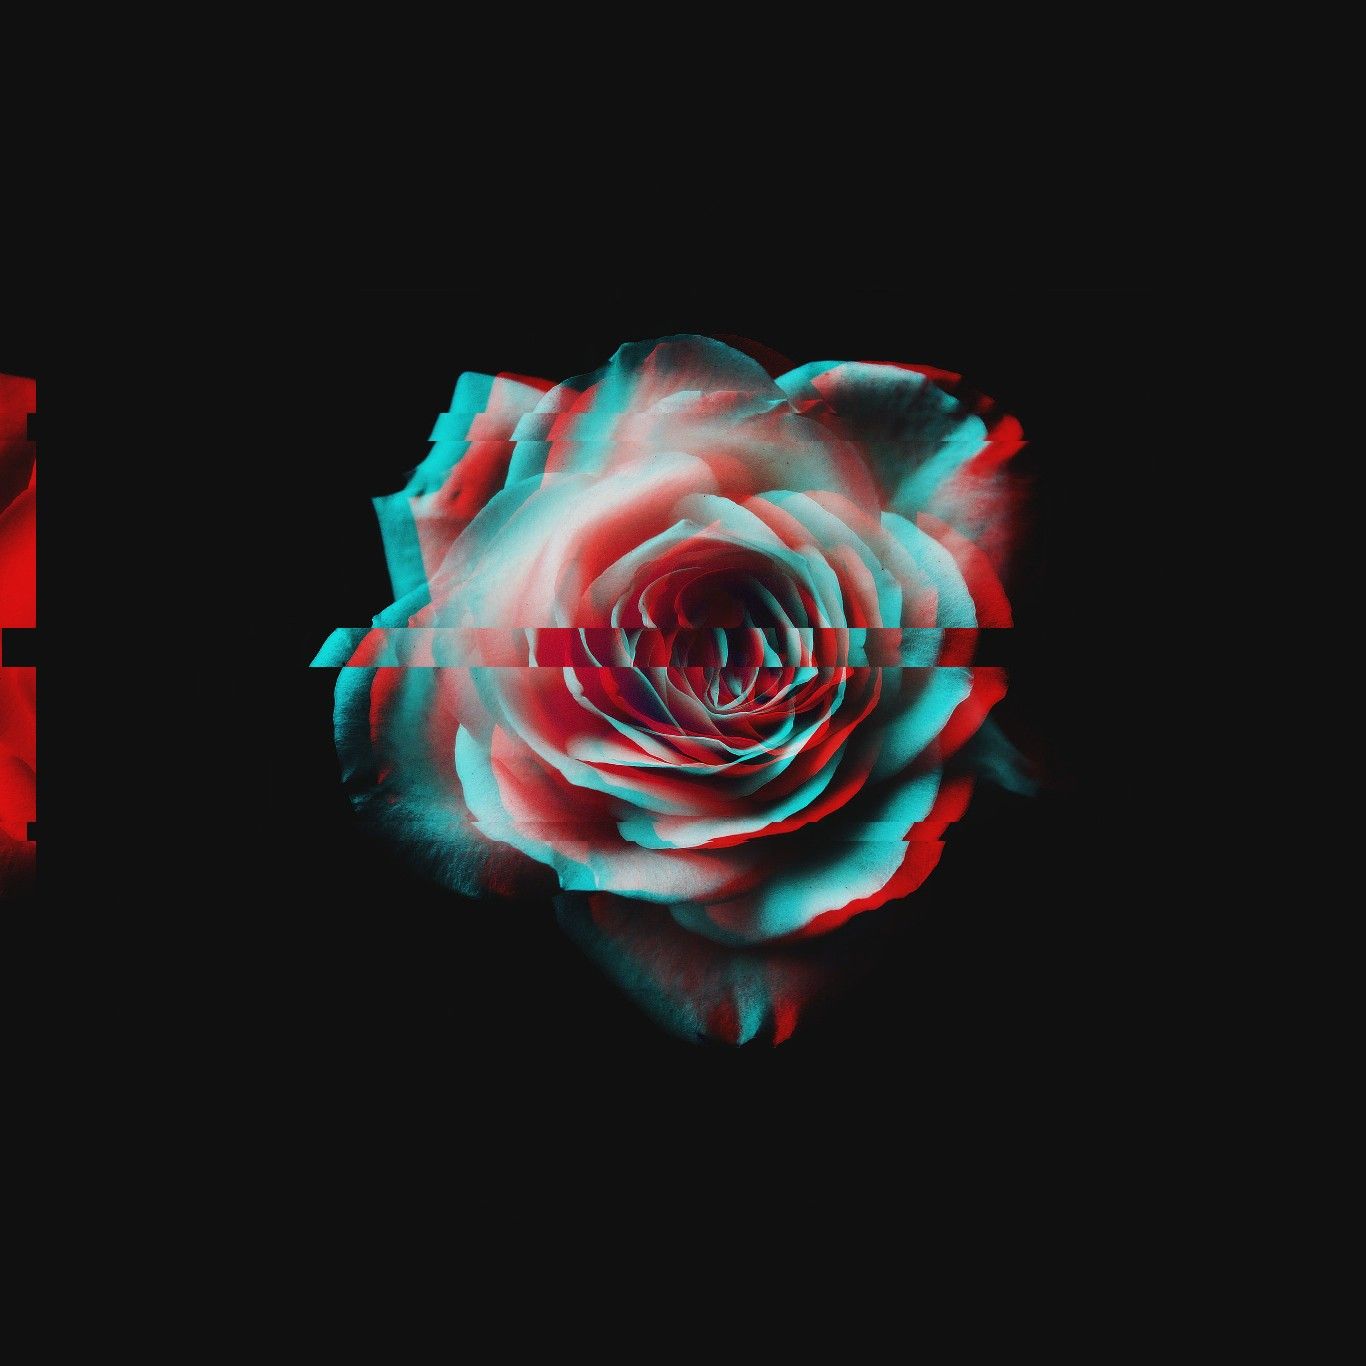 Glitch Rose Amoled Glitch wallpaper Aesthetic roses Rose wallpaper